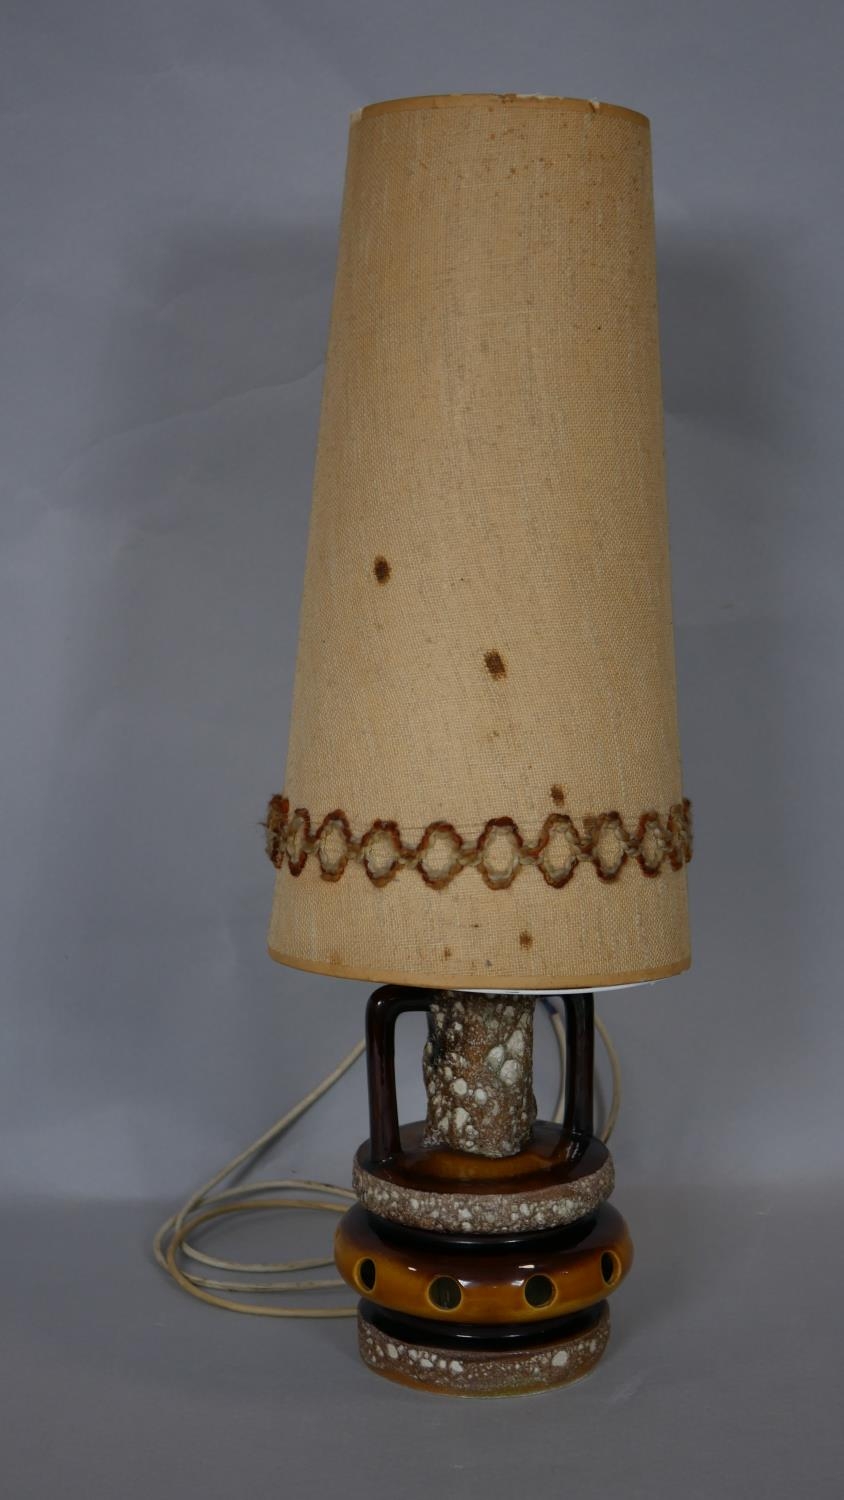 A vintage West German Pottery table lamp with fat lava glaze and its original woven shade. H.78cm (